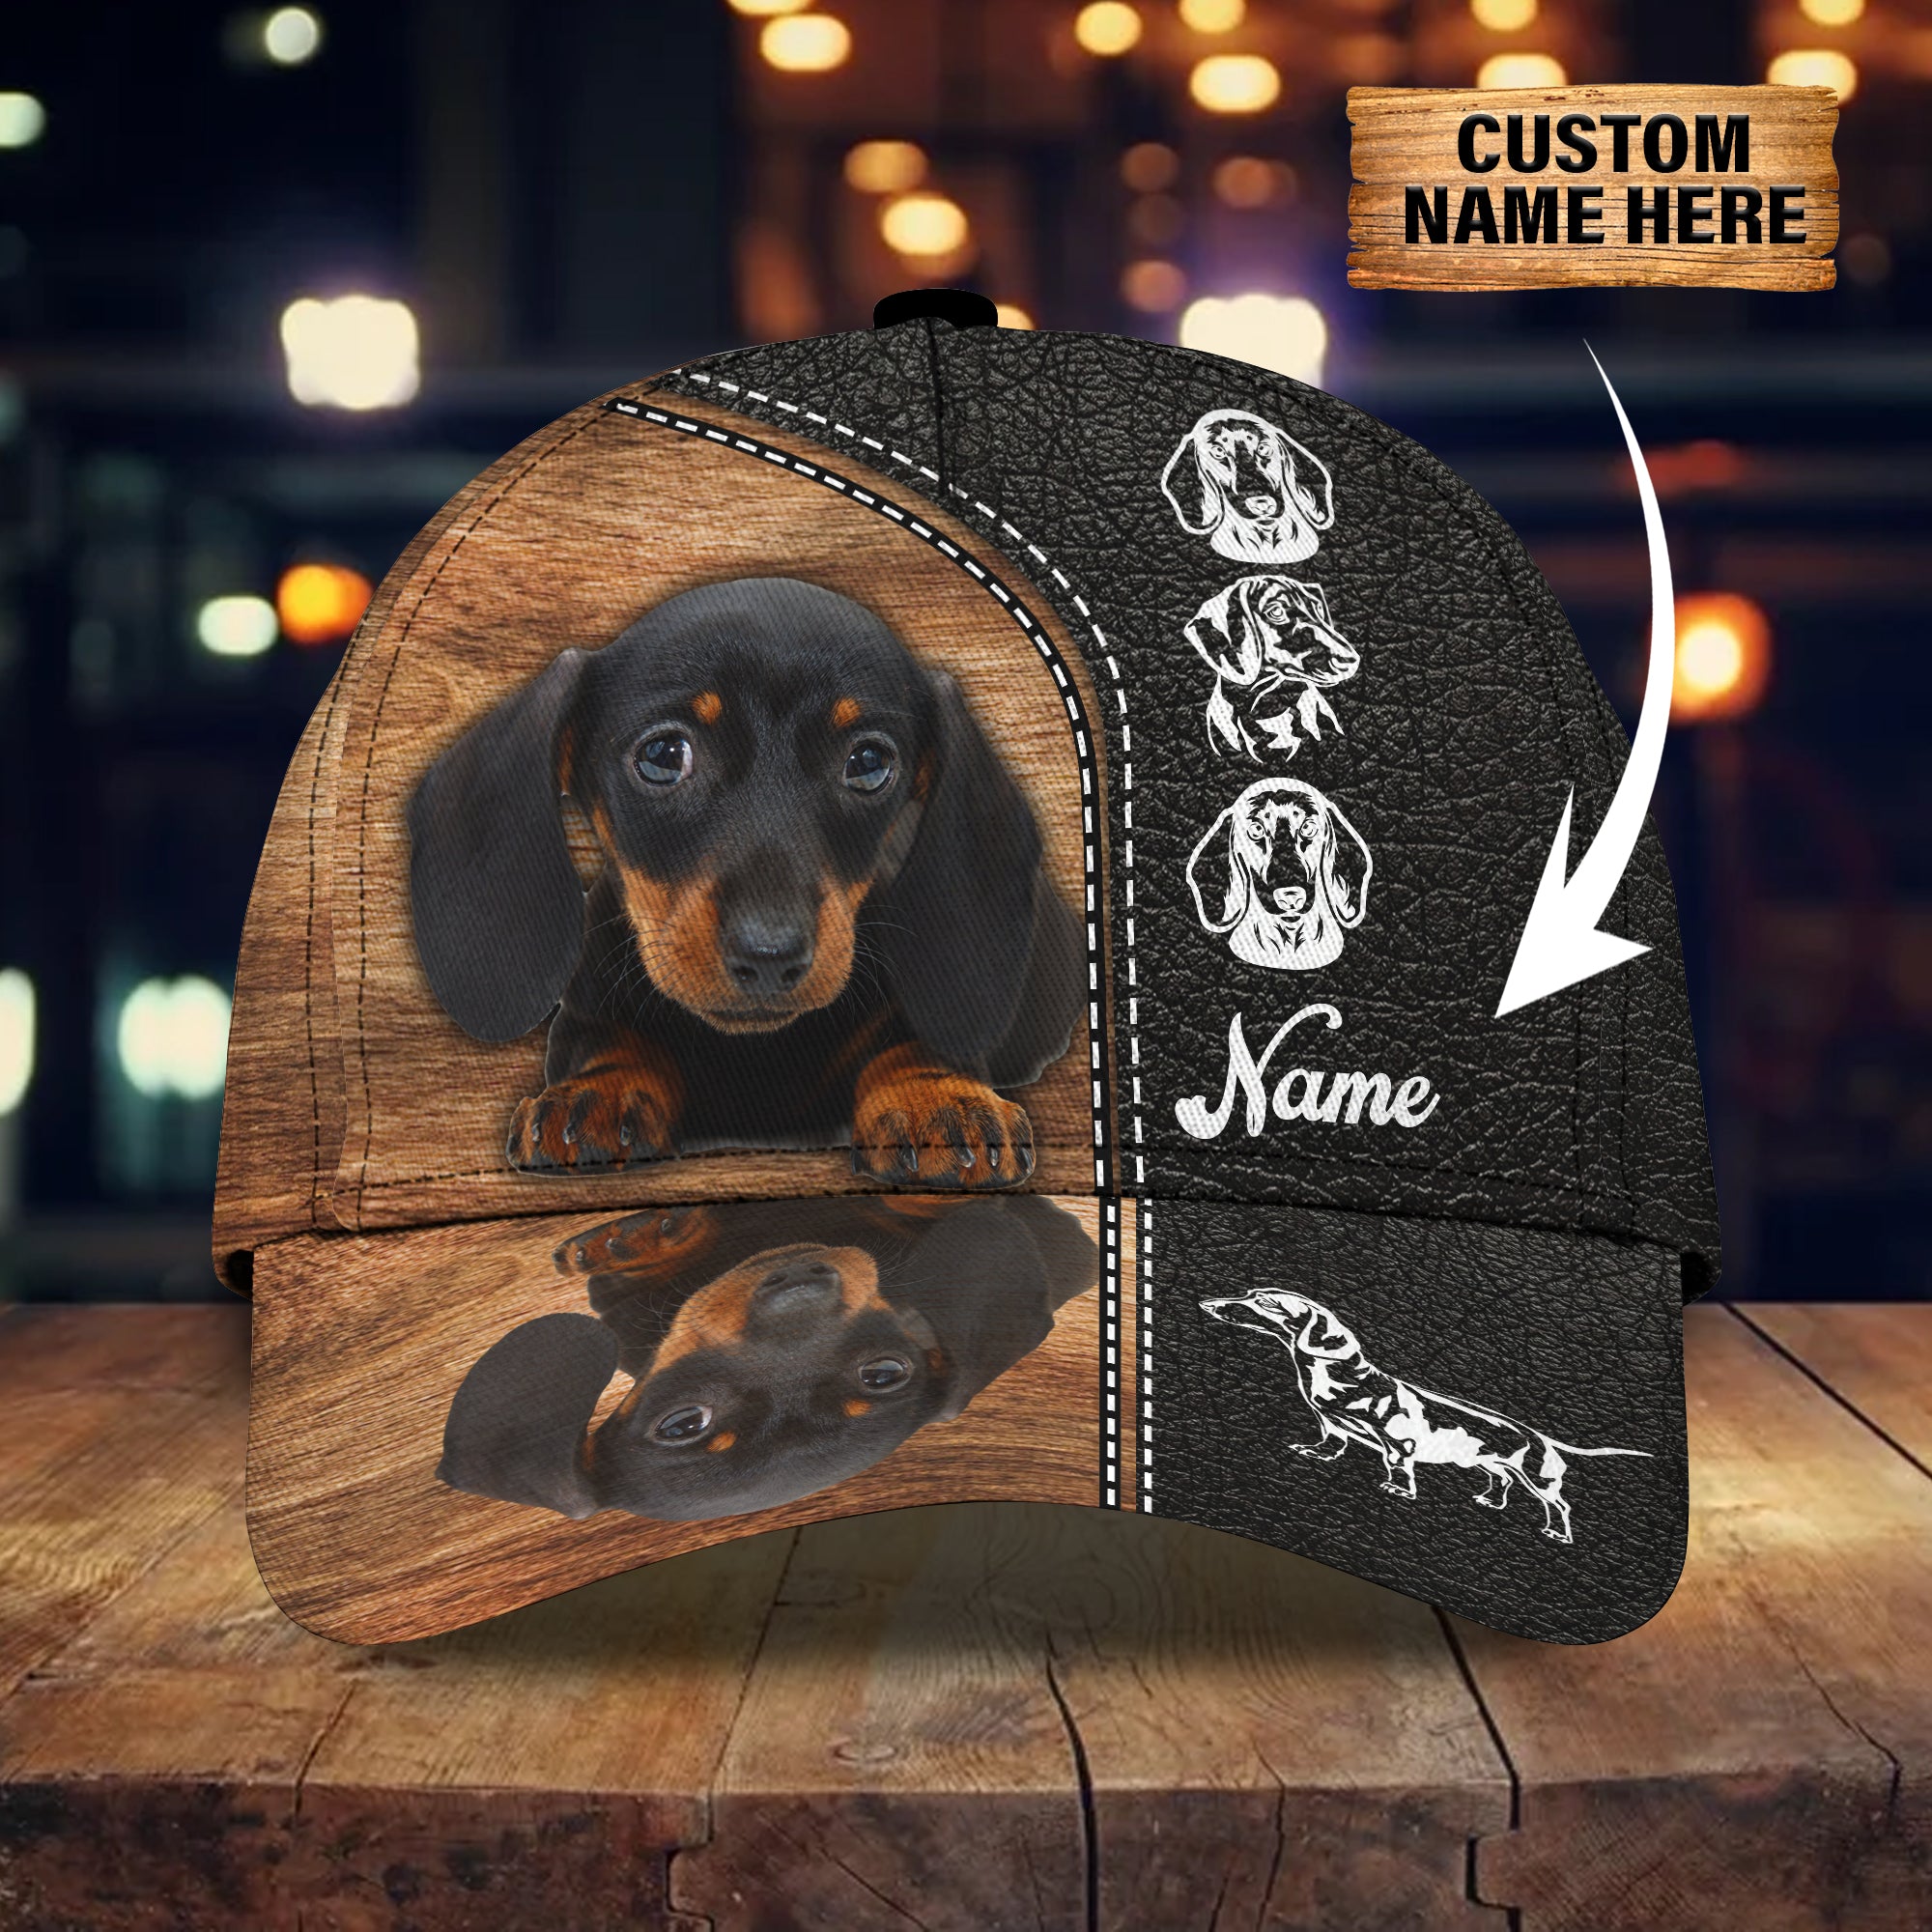 Dachshund - Personalized Name Cap - H98 007